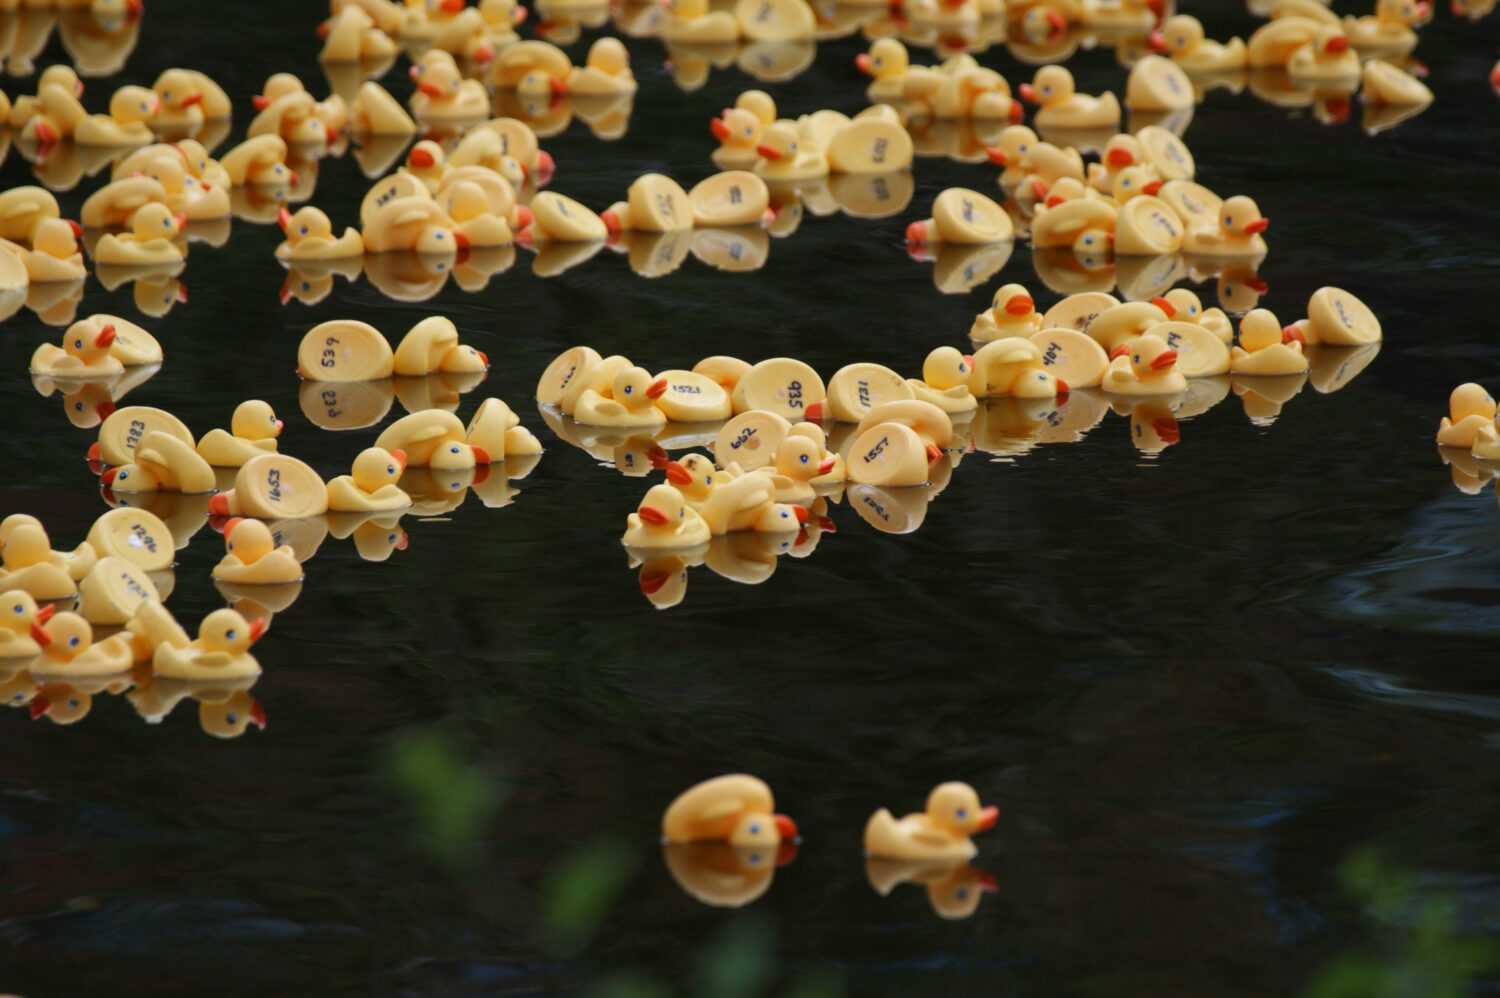 10th Annual Lions Rubber Duck Race